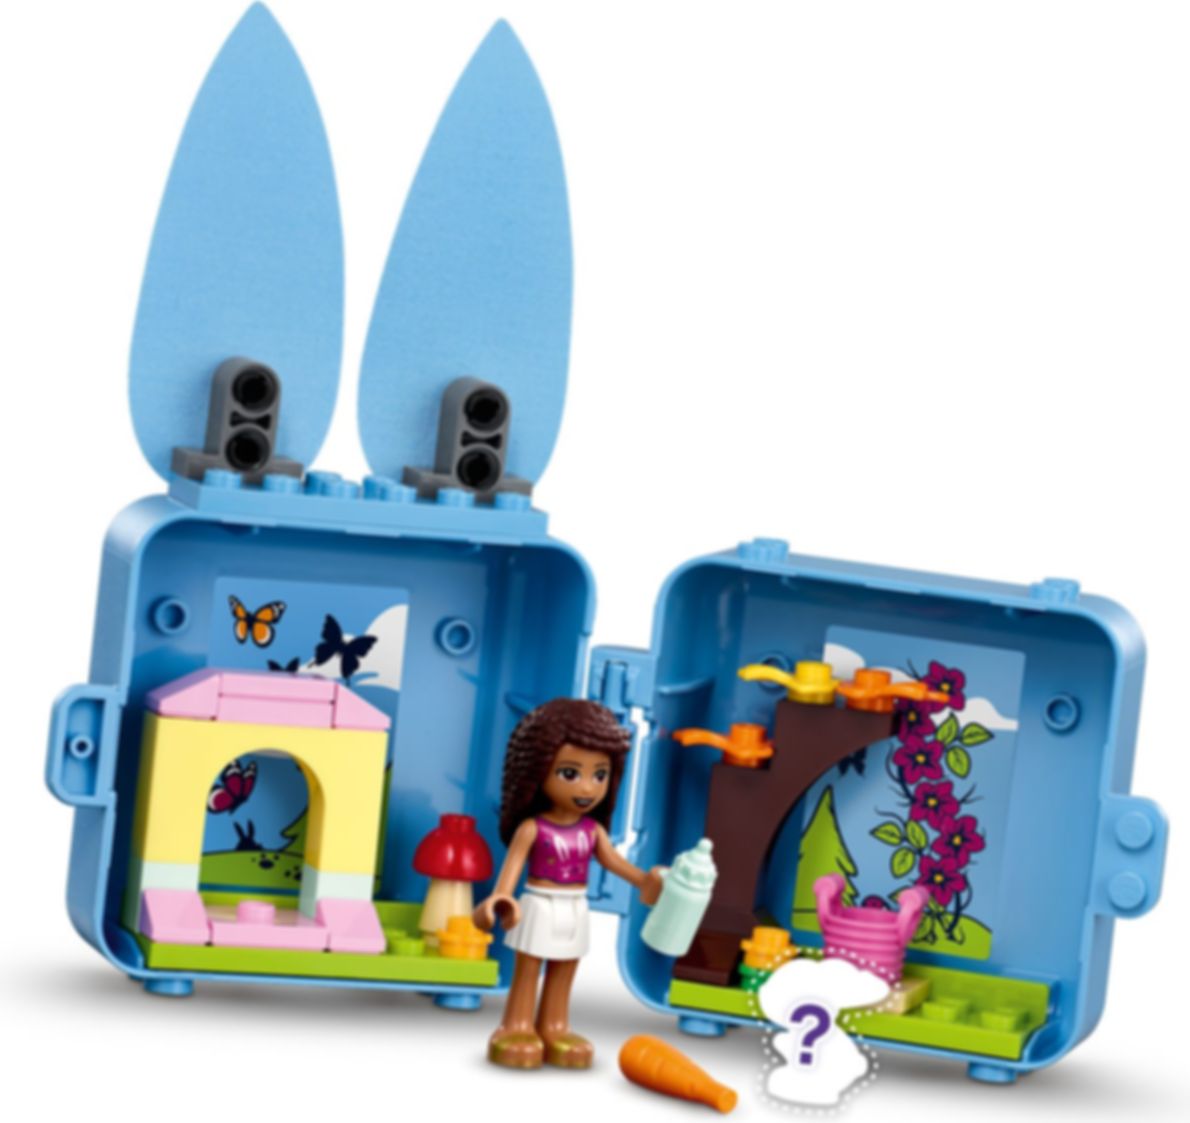 LEGO® Friends Andrea's Bunny Cube gameplay